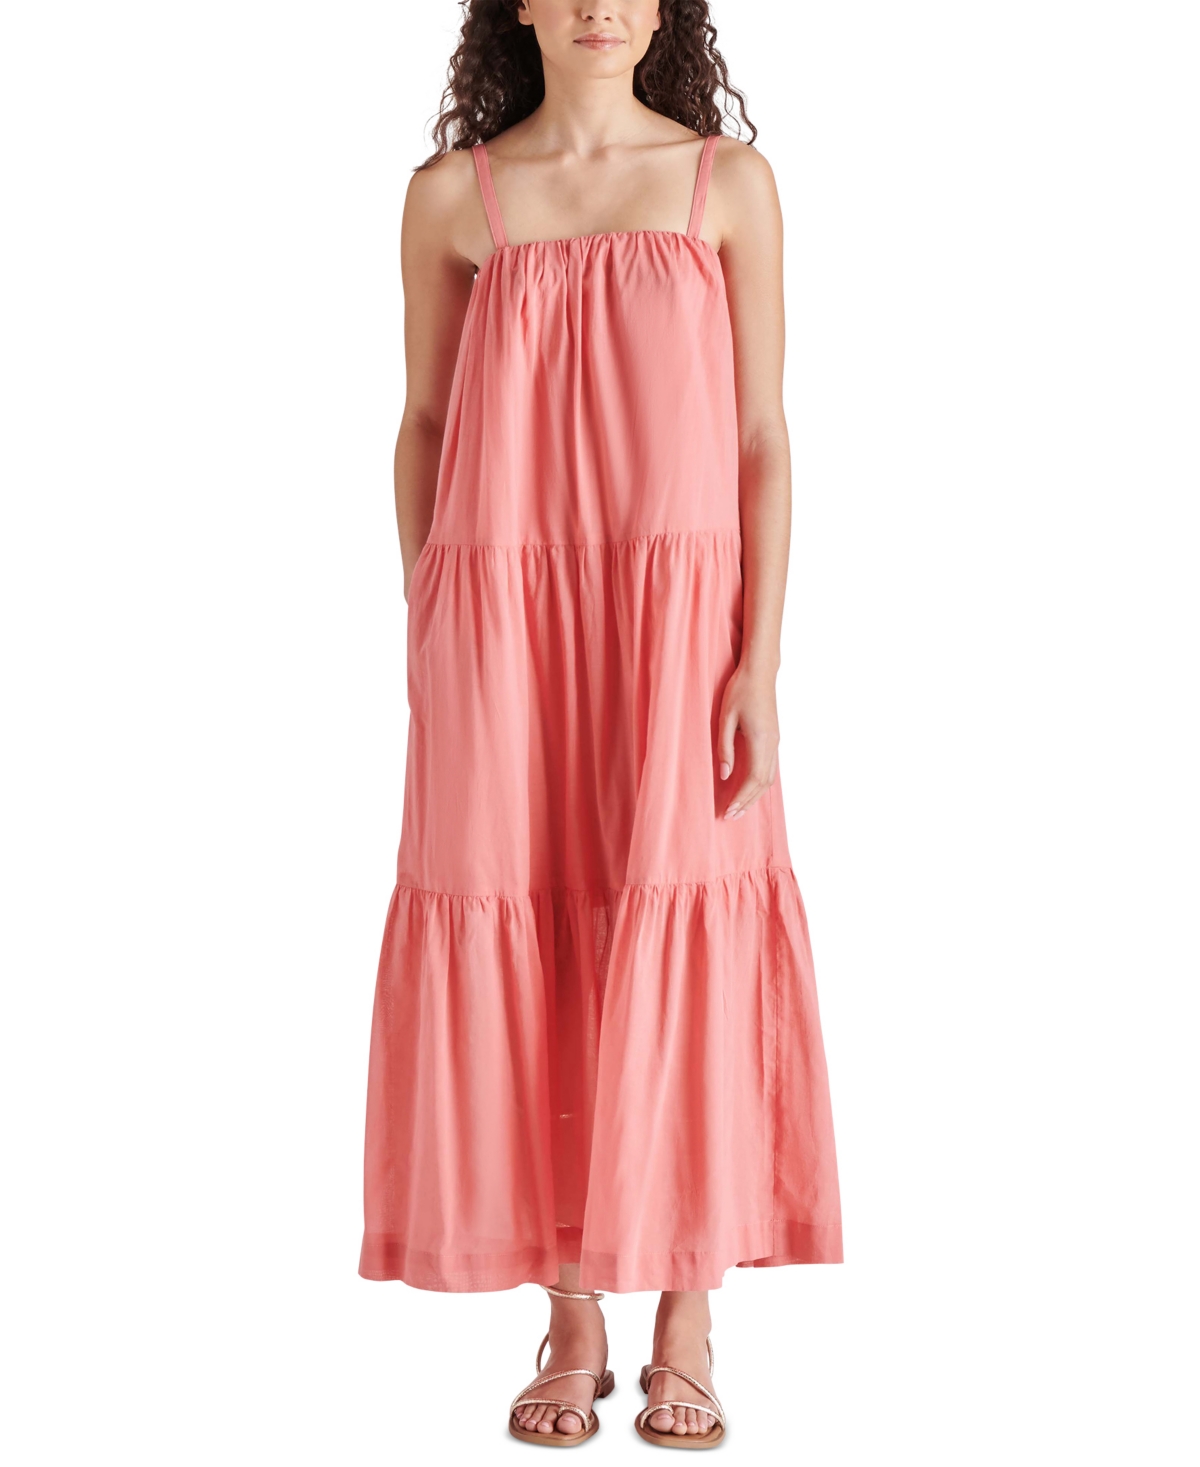 Women's Oceane Tiered Square-Neck Removable-Strap Dress - Peach Romance